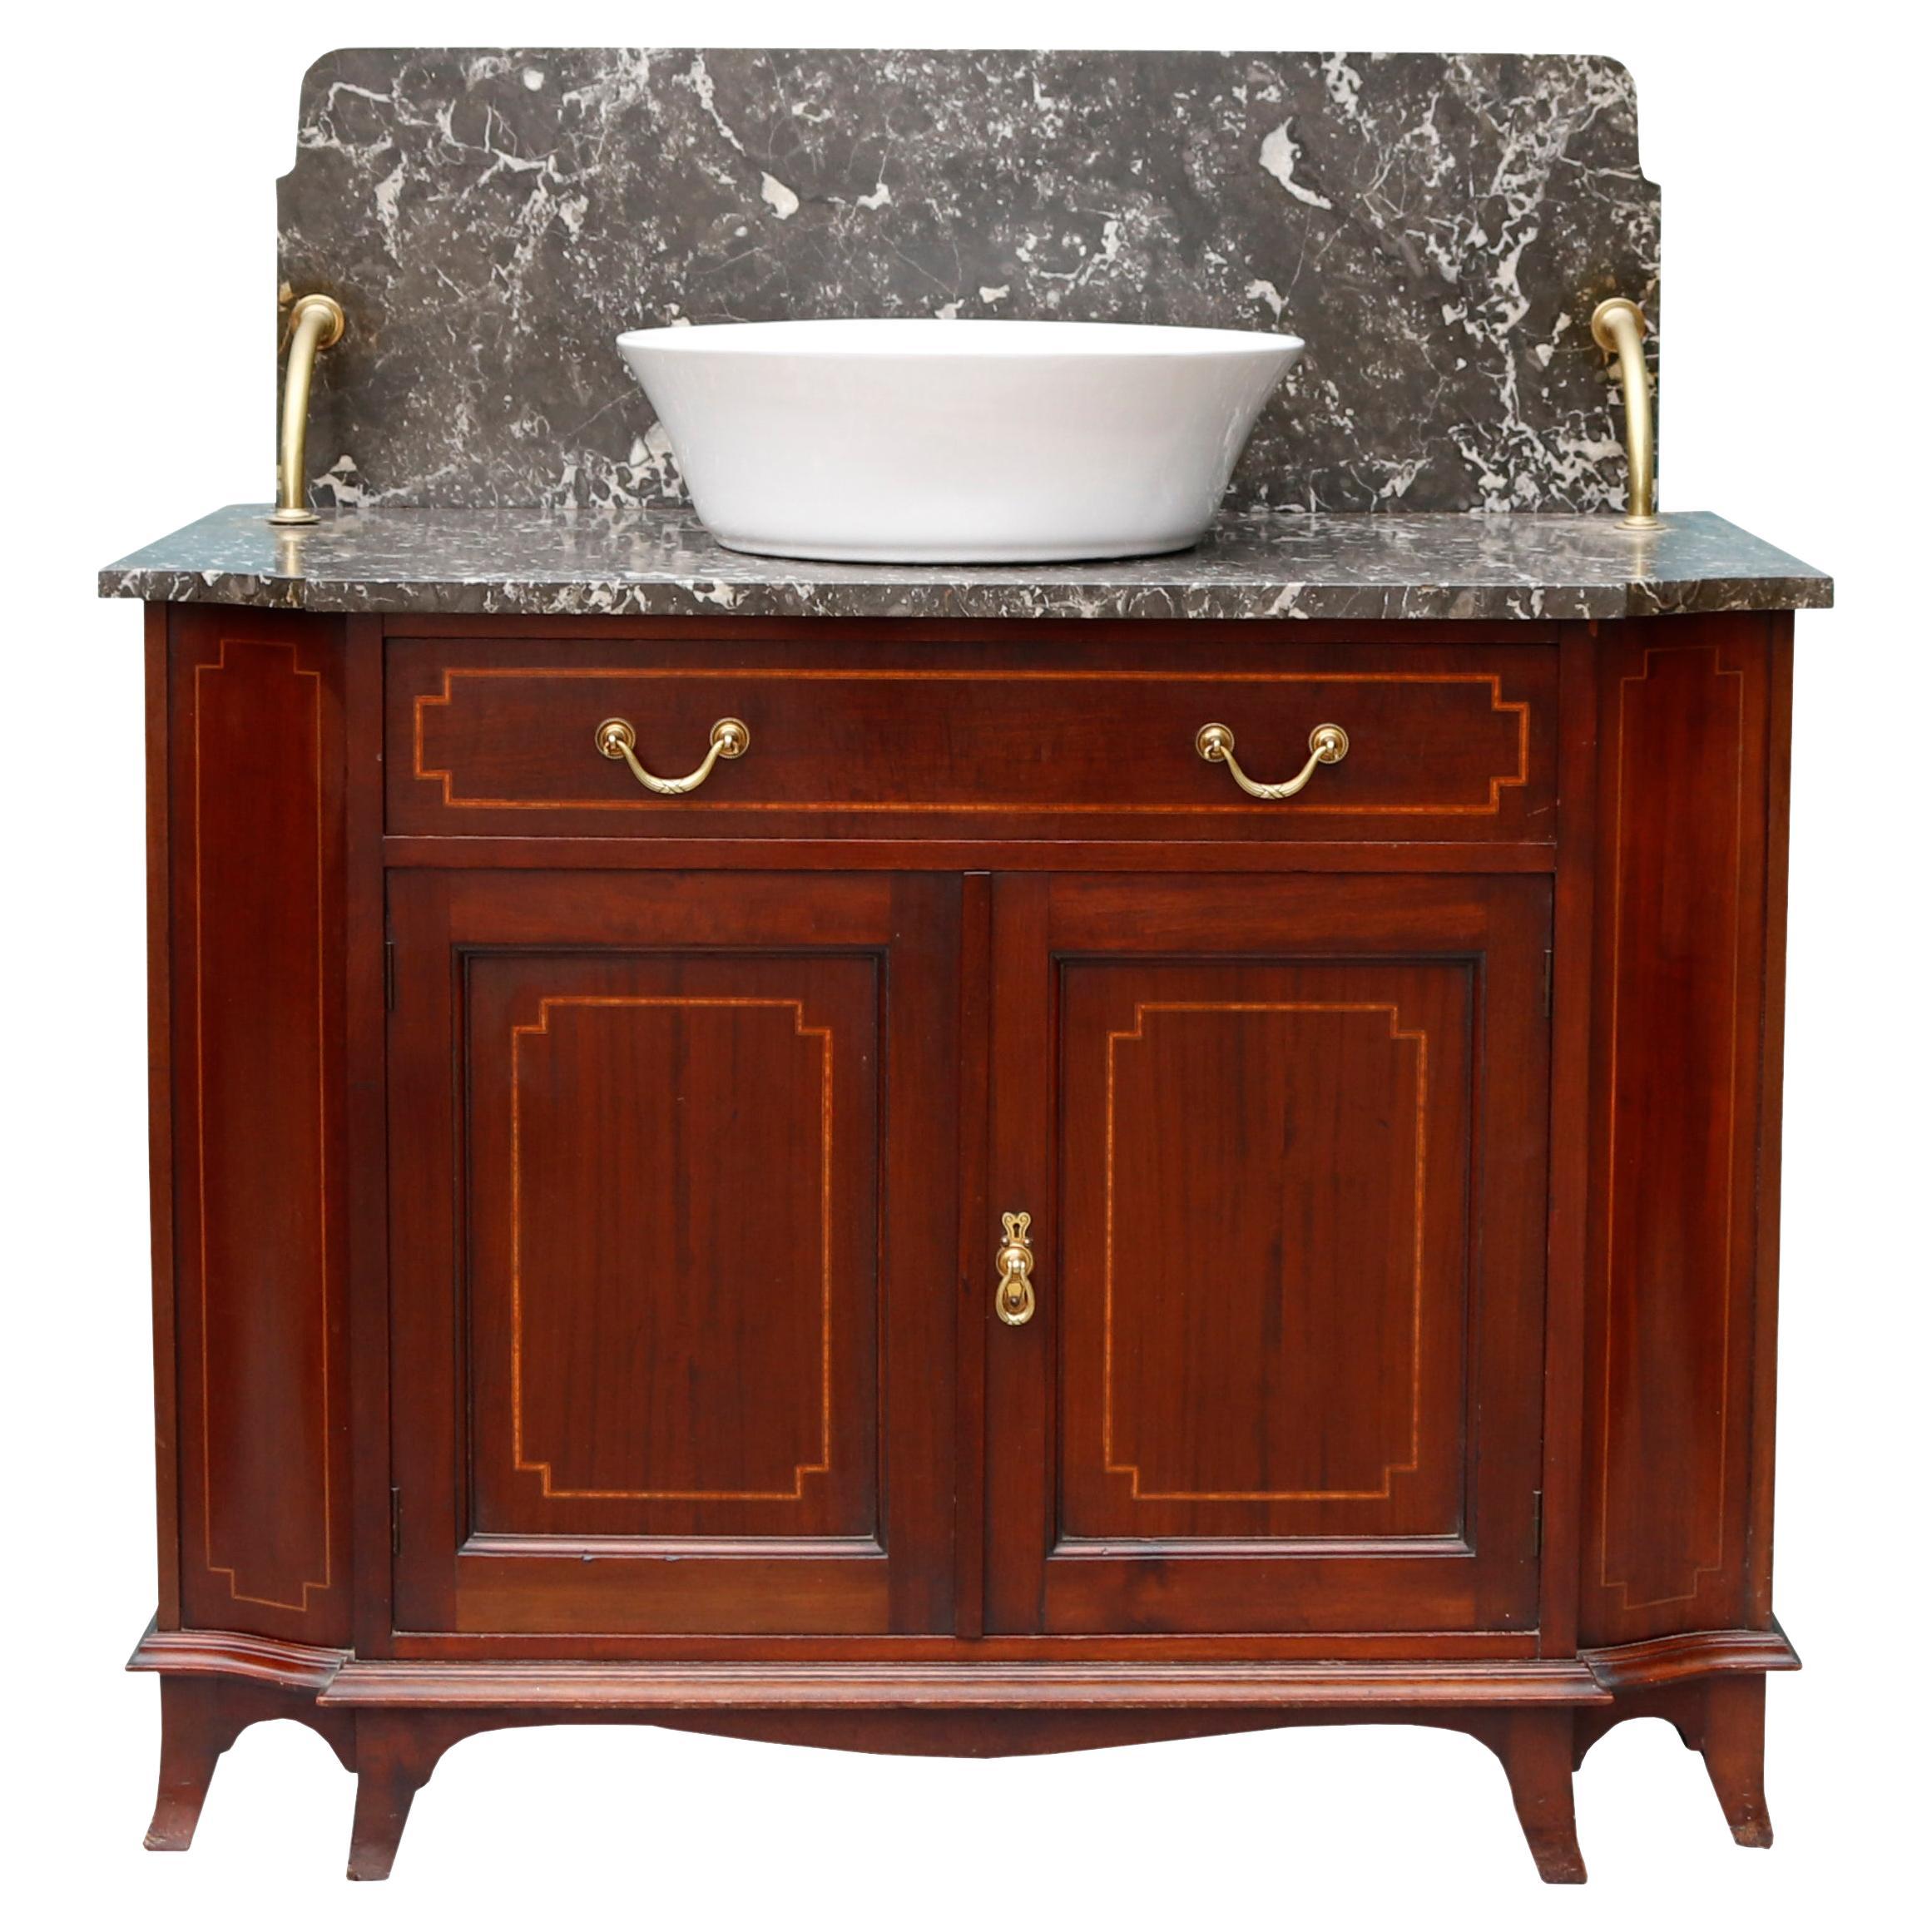 What is a Victorian washstand?